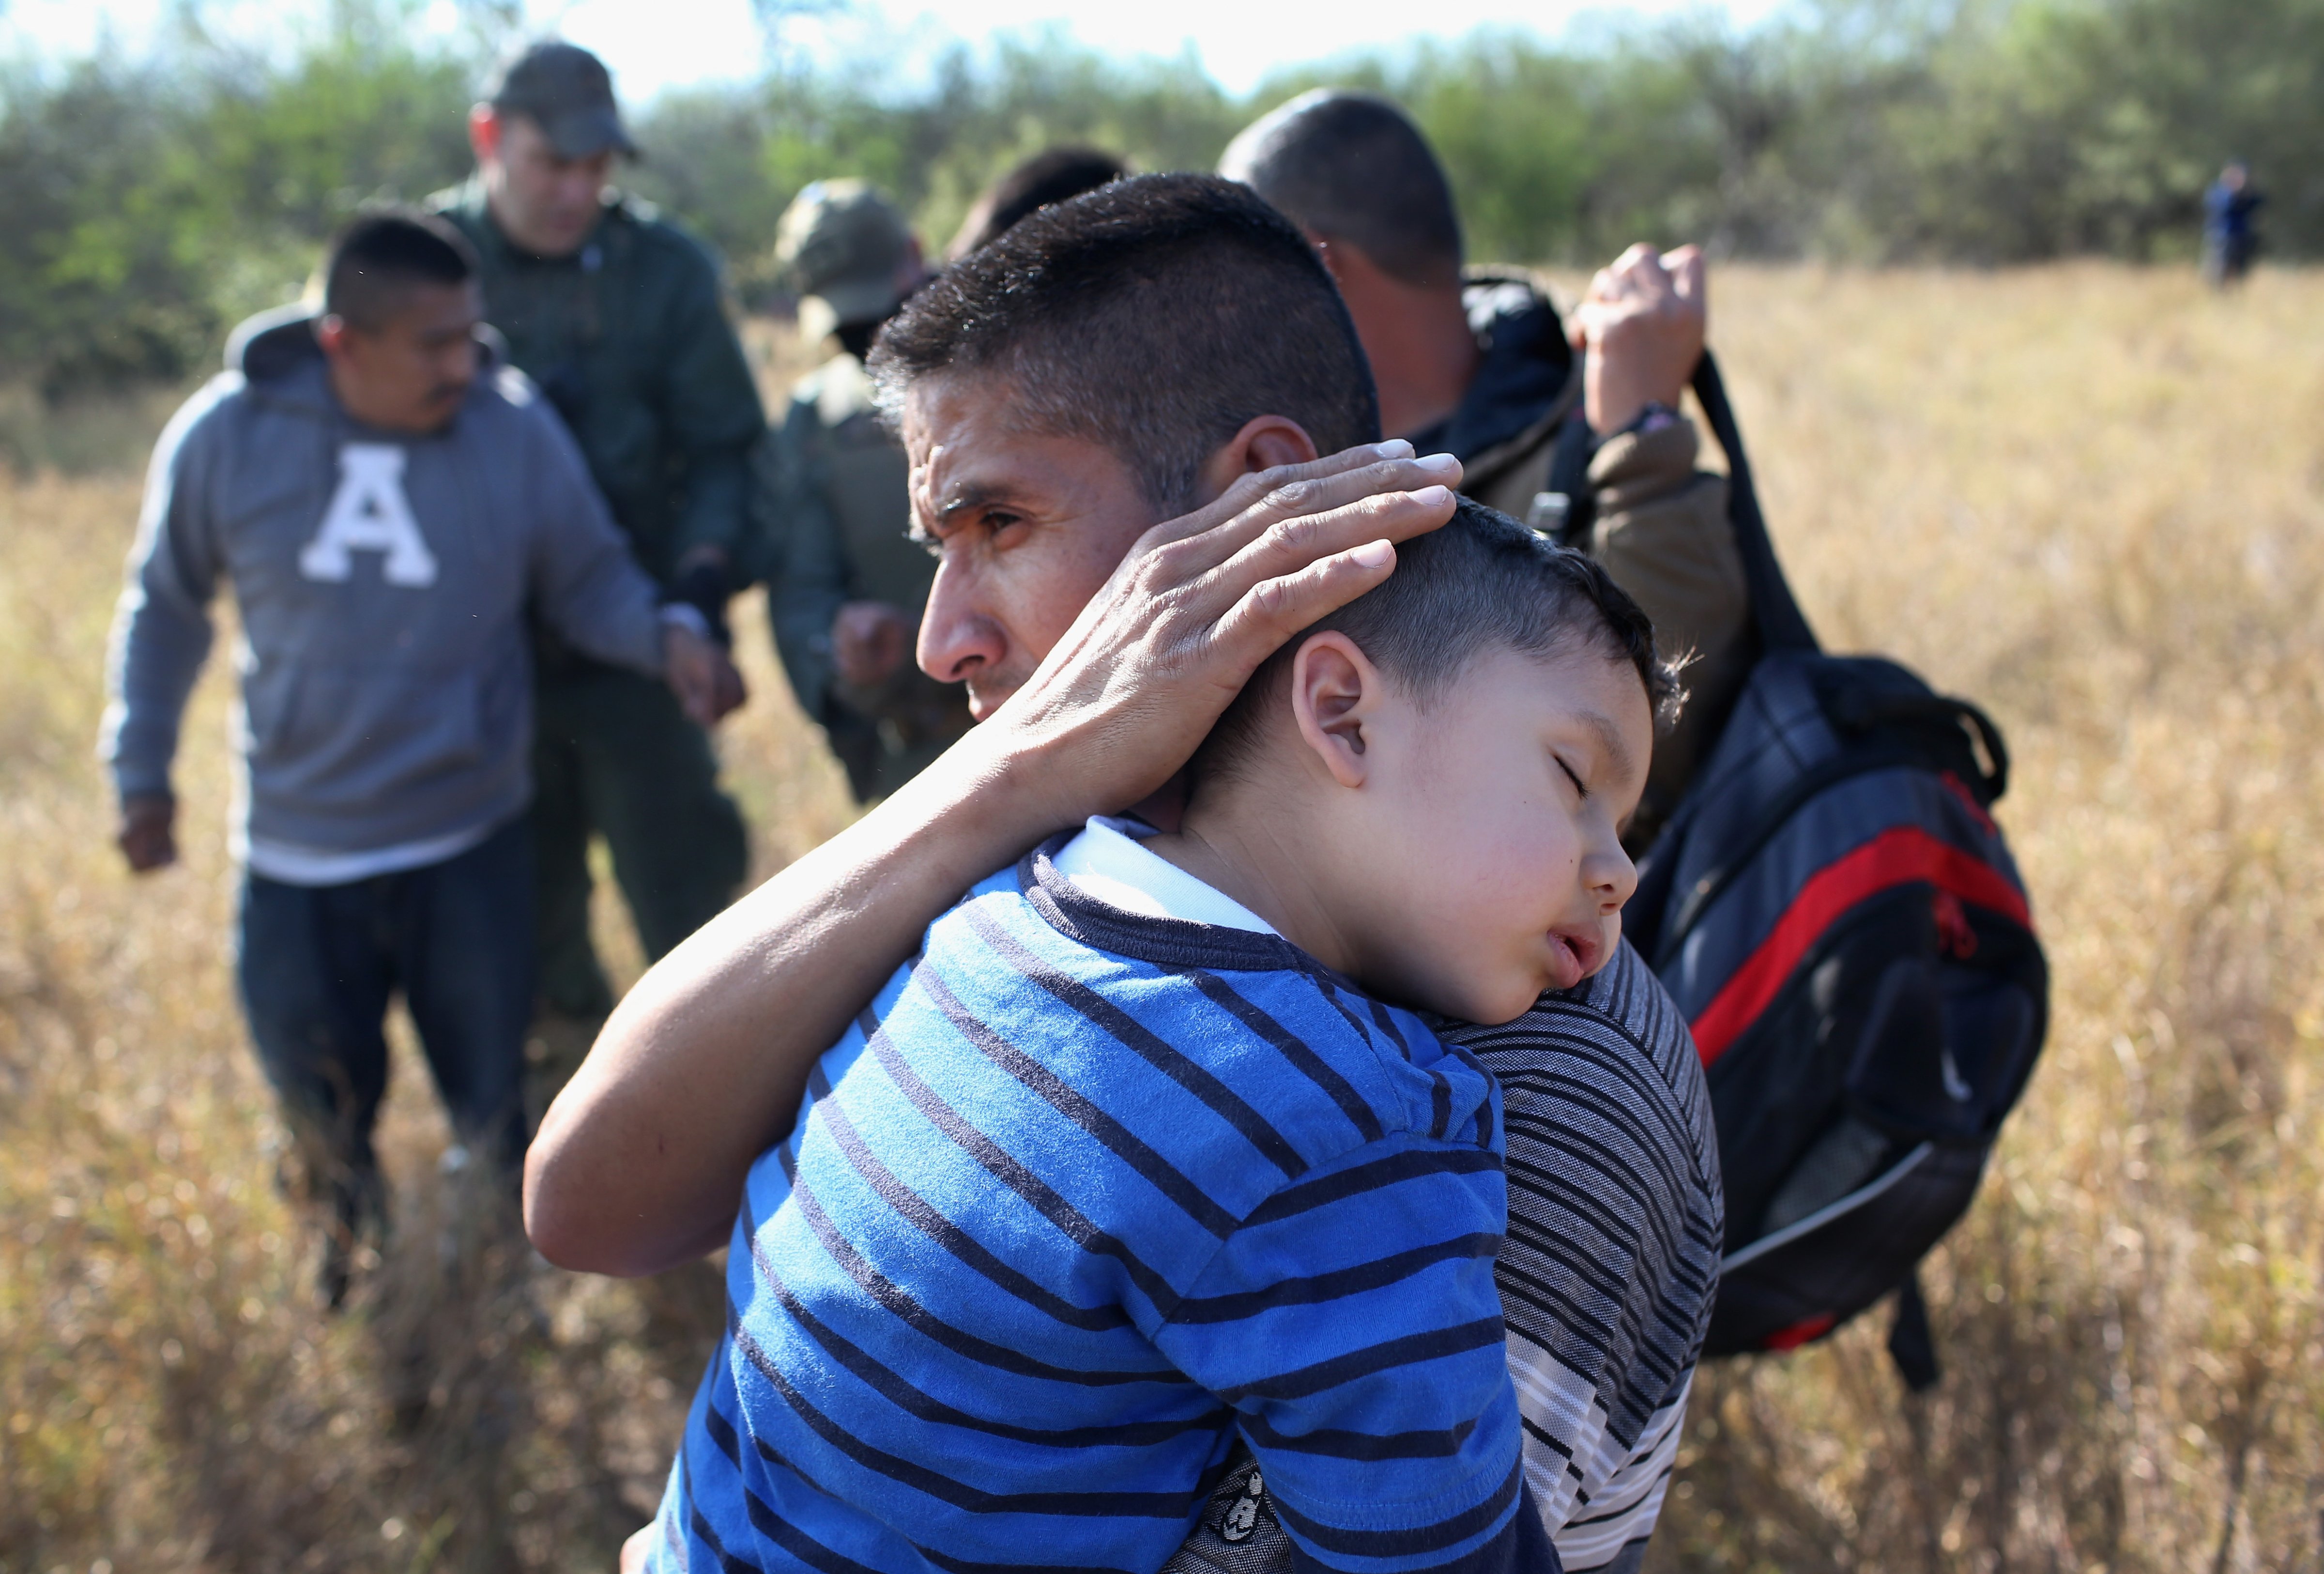 A father and his son after being detained by Border Patrol agents on Dec. 7, 2015 near Rio Grande City, Texas. (John Moore&mdash;Getty Images)